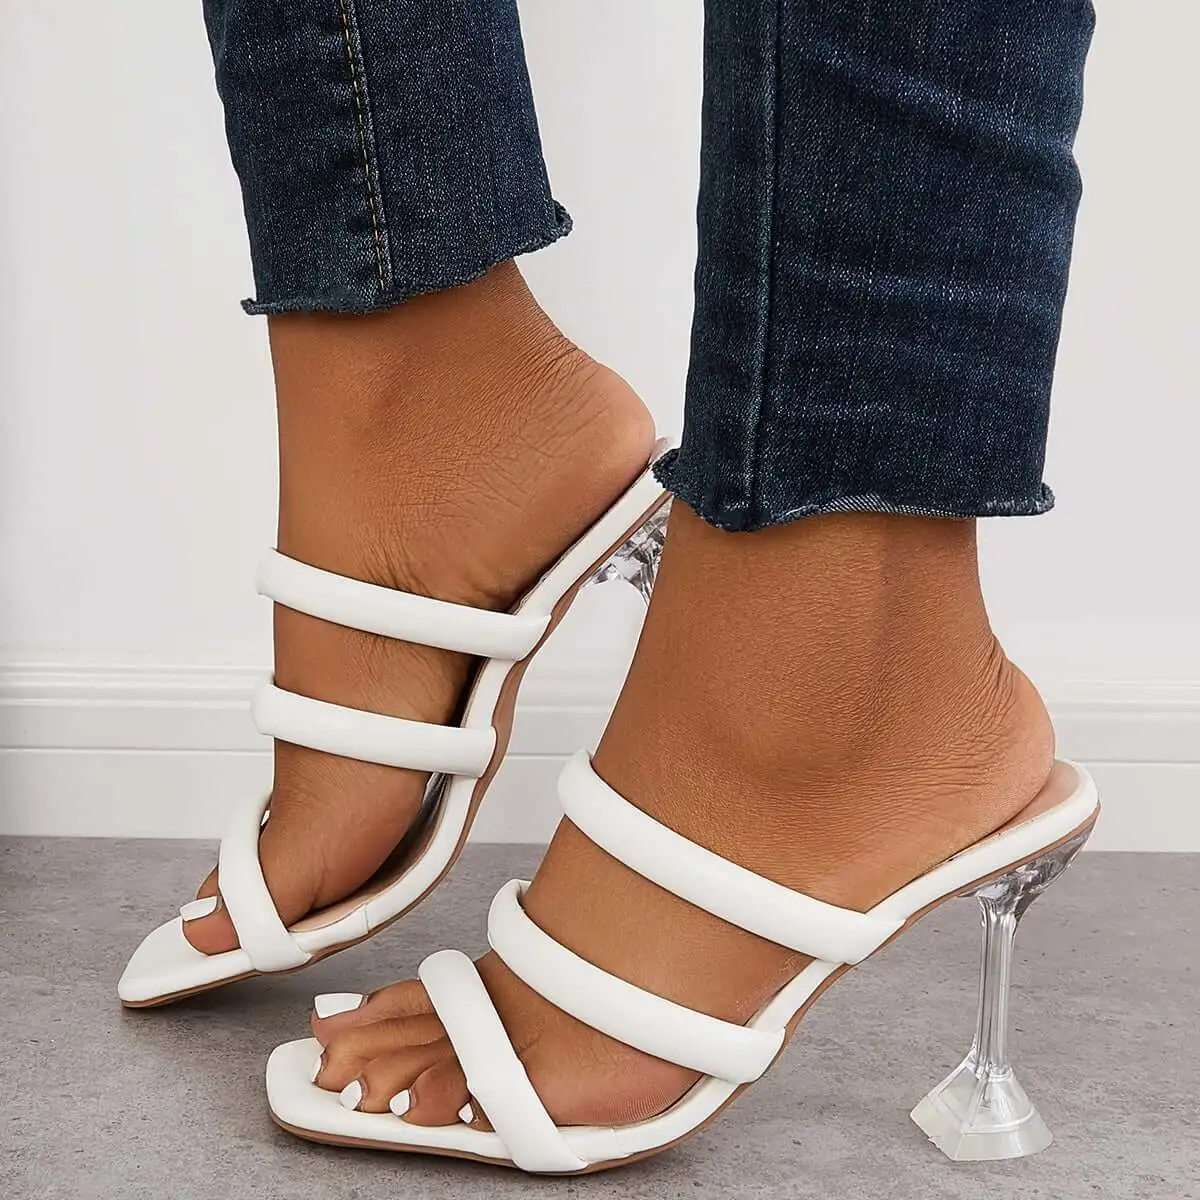 Open Toe Backless Mules Sandals Slip-on Clear High Stiletto Heels